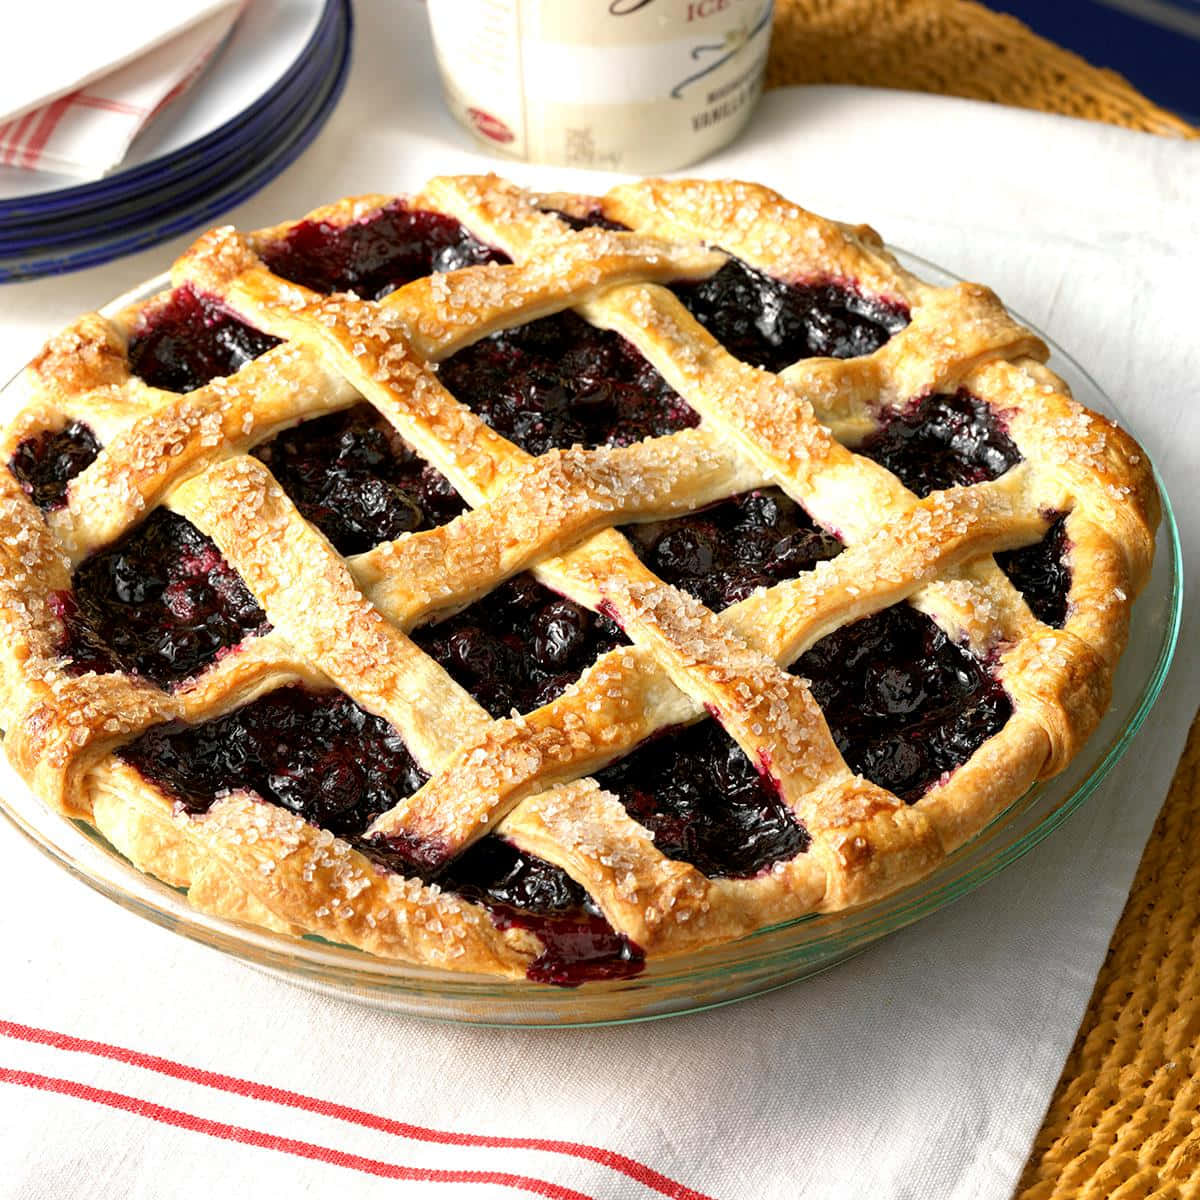 "Tantalizingly sweet and delicious, a freshly prepared Blueberry Pie topped with vanilla ice cream - heavenly! Wallpaper